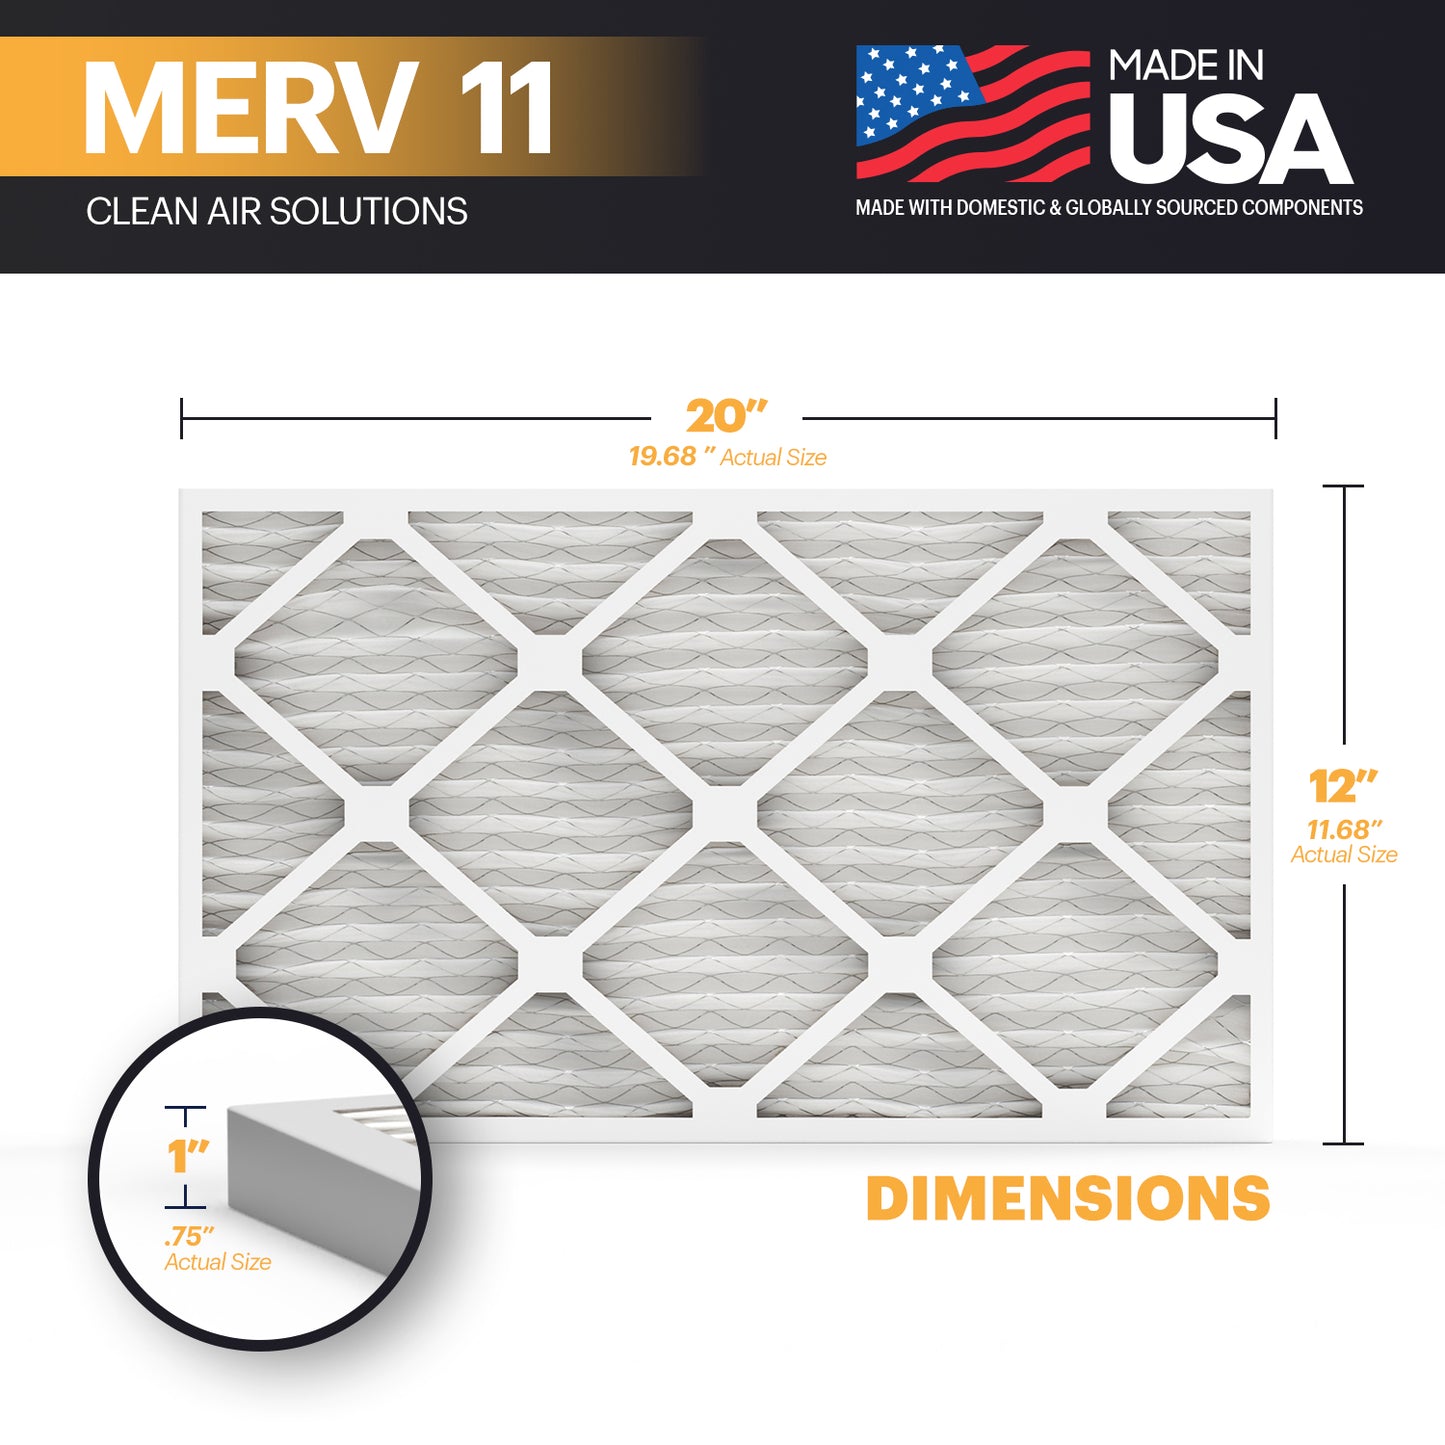 BNX TruFilter 12x20x1 MERV 11 Air Filter 6 Pack - MADE IN USA - Electrostatic Pleated Air Conditioner HVAC AC Furnace Filters - Removes Dust, Mold, Pollen, Lint, Pet Dander, Smoke, Smog